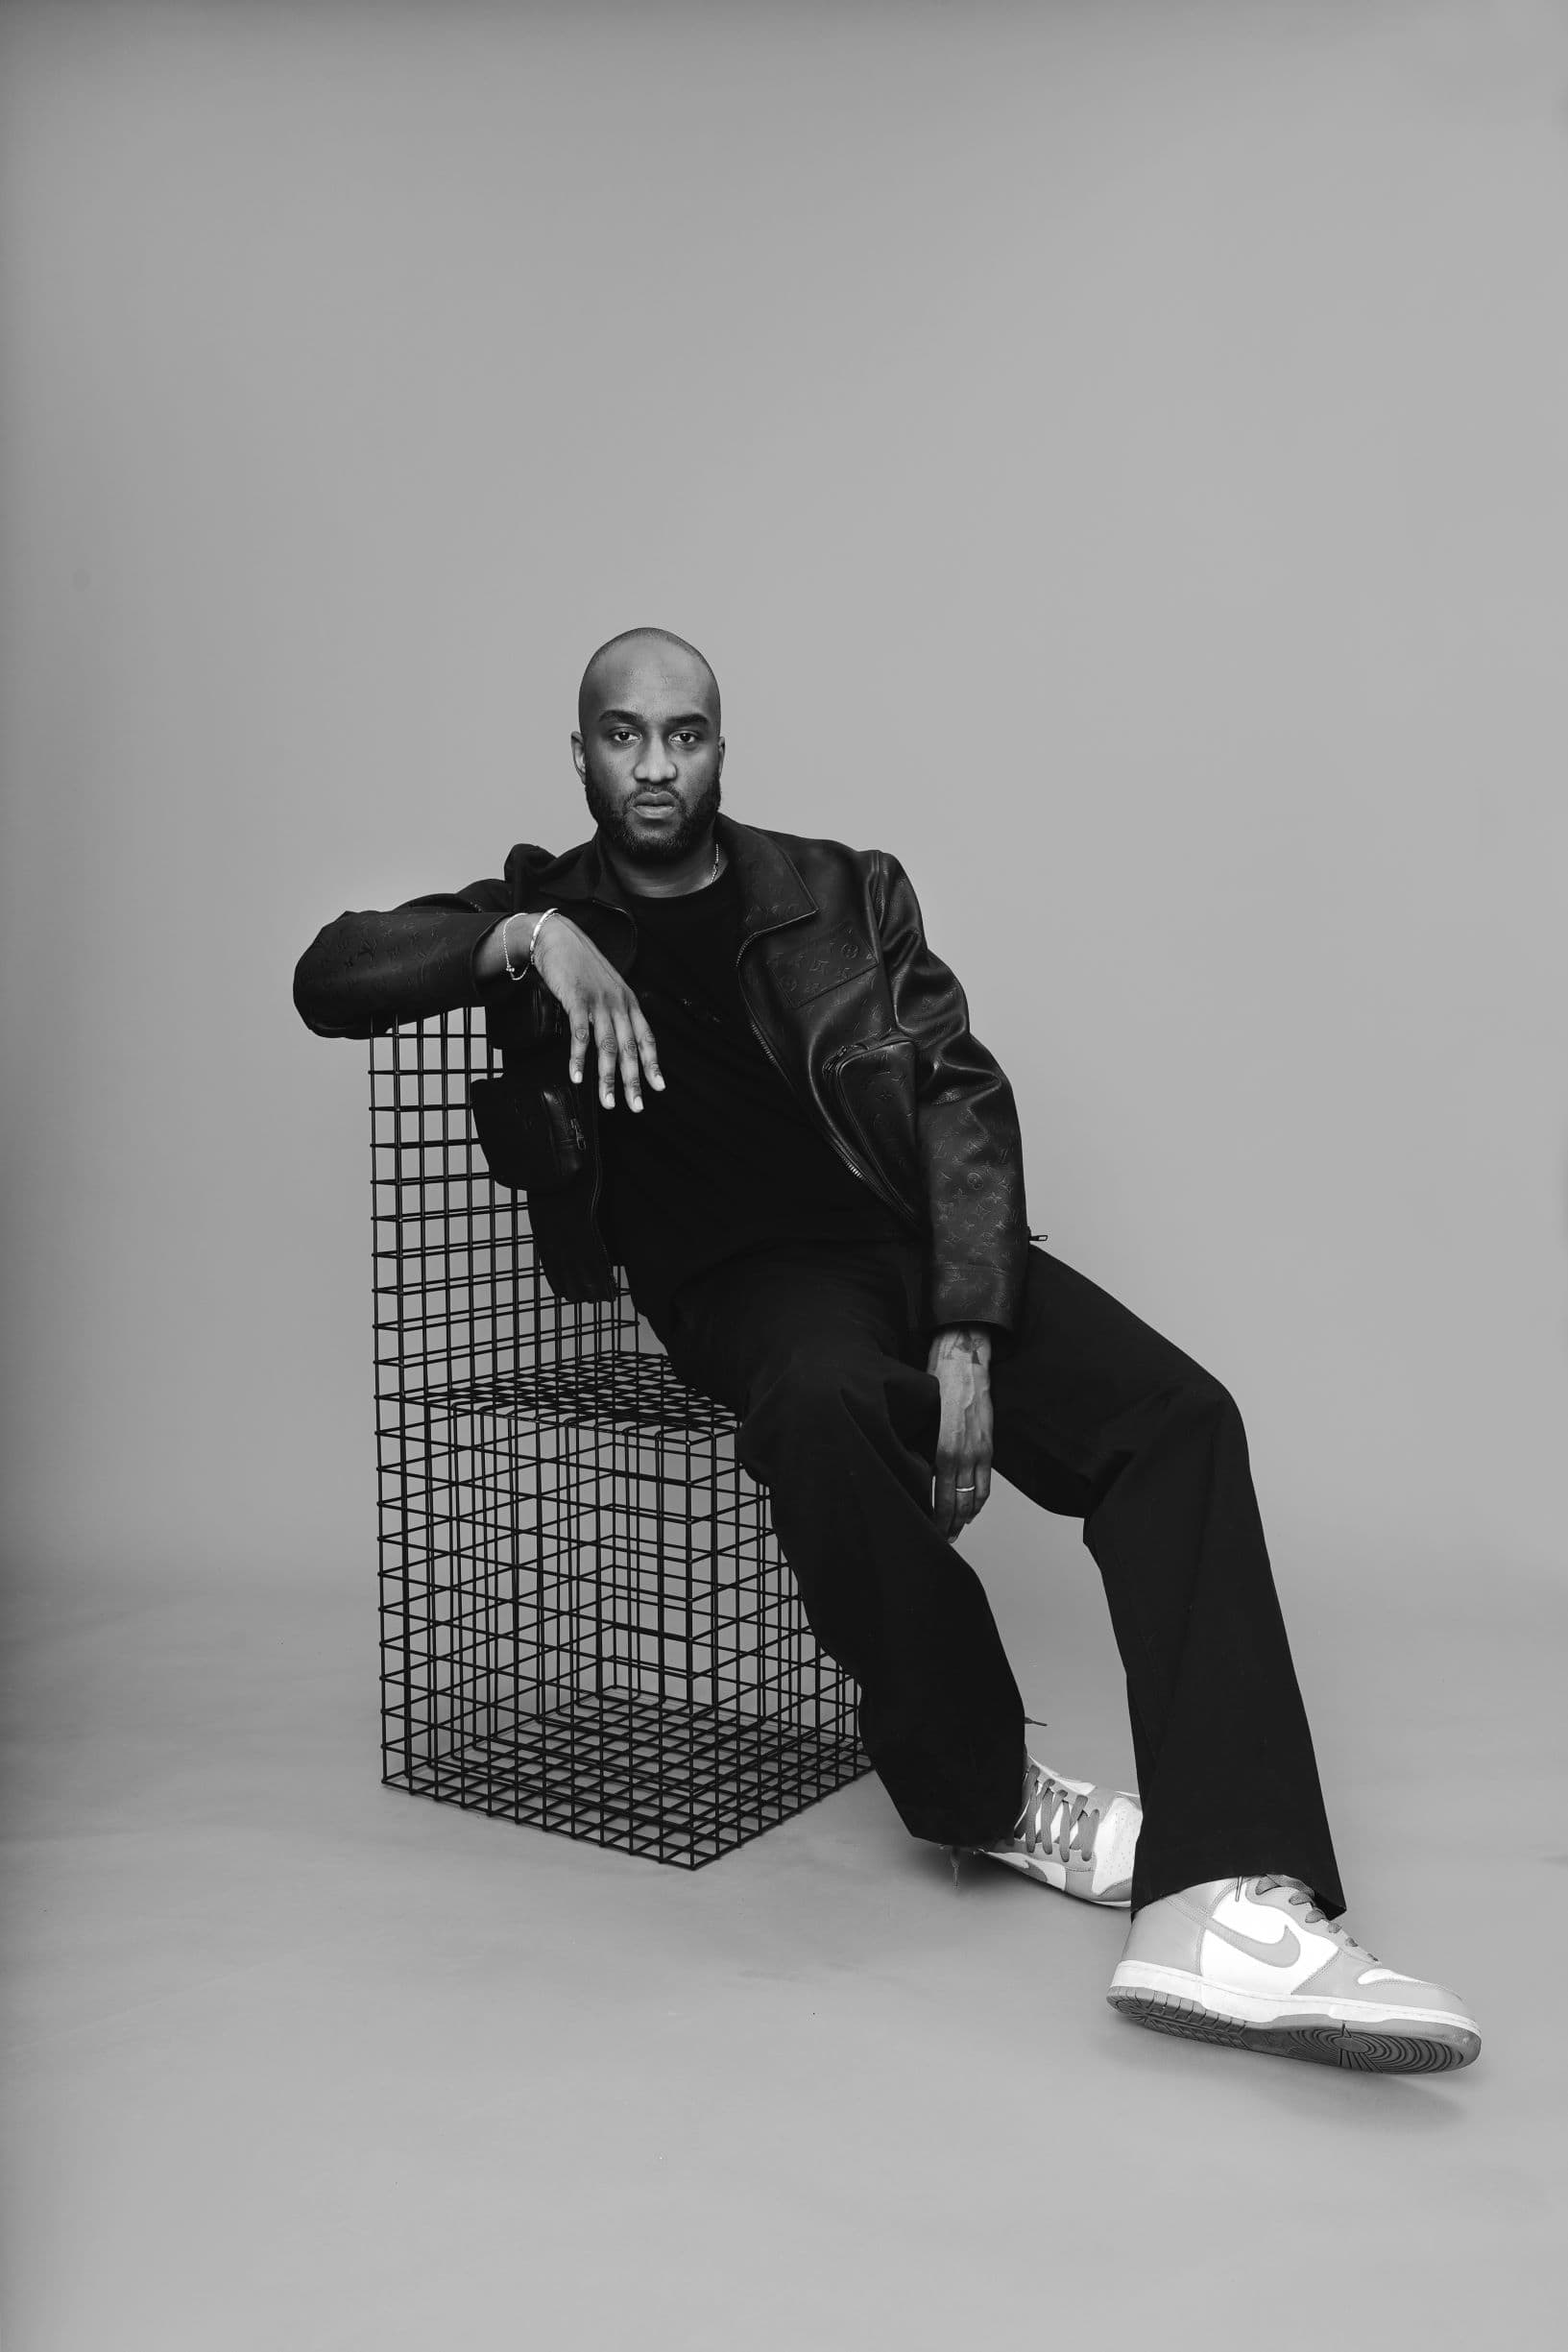 Virgil Abloh's second collection for Louis Vuitton is 'Off the Wall